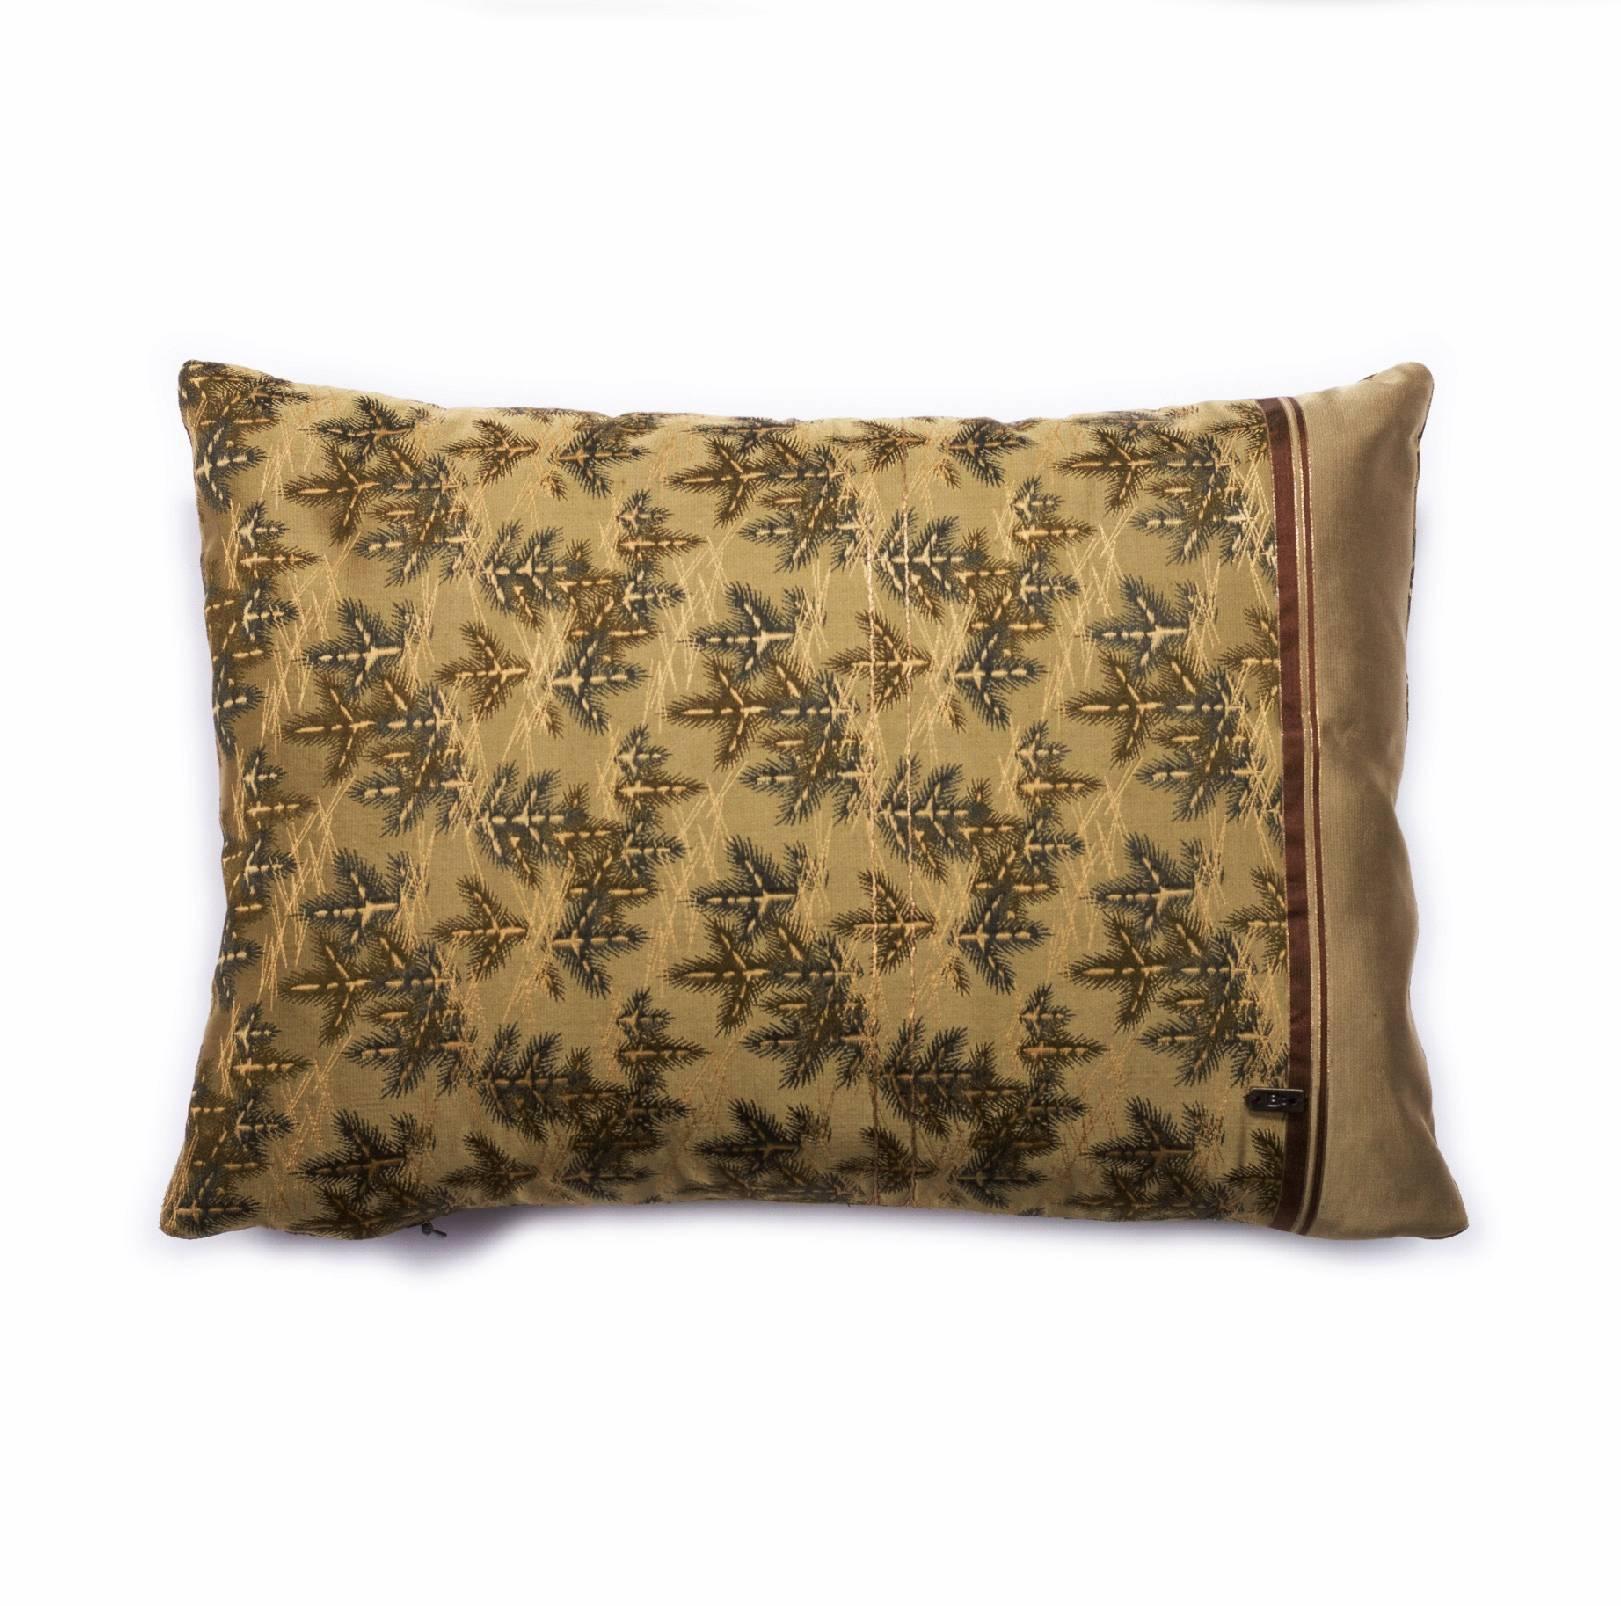 Antique Japanese obe silk.   Three different obe were carefully chosen to create a harmonious blend of color and pattern.  The pillow has been completed with silk inserts and a hand embroidered back.     

Details
	•	Antique silk 
	•	Hand